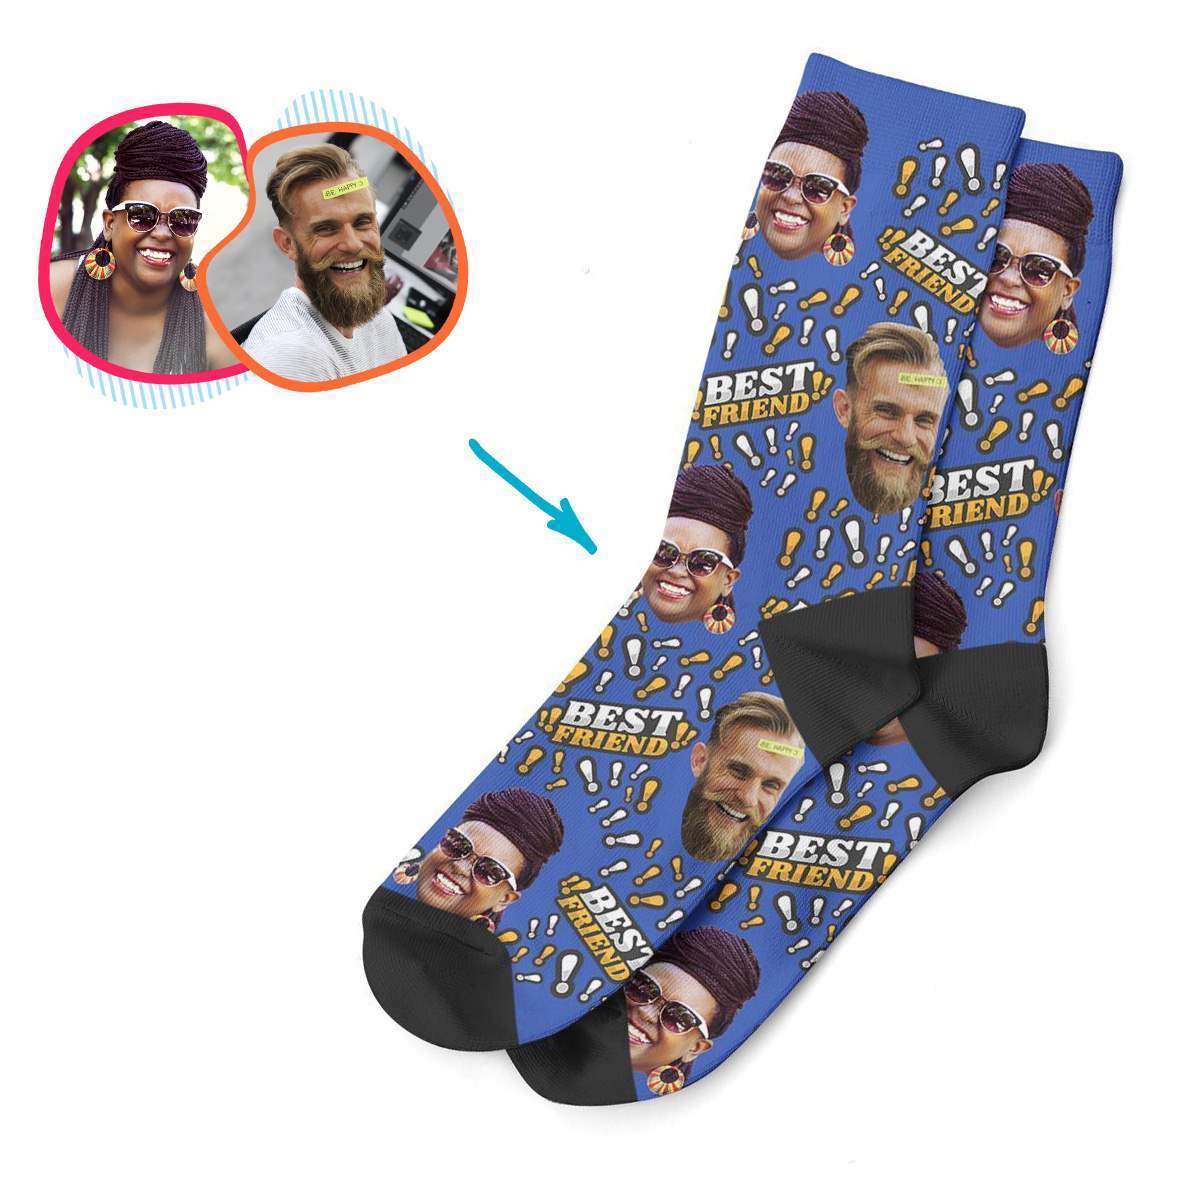 darkblue Best Friend socks personalized with photo of face printed on them